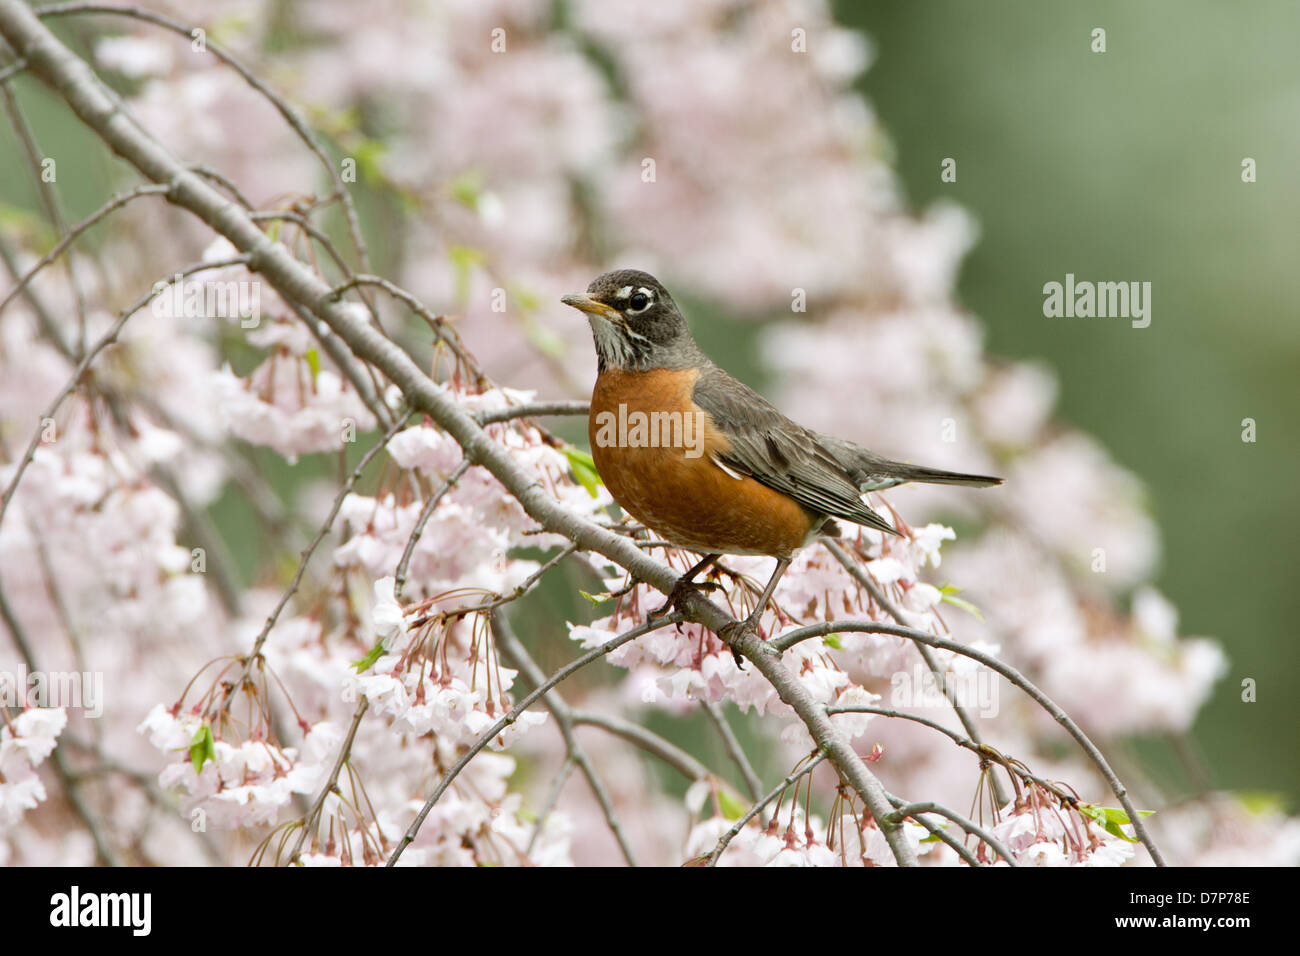 American Robin perching in Weeping Cherry Tree Blossoms bird songbird Ornithology Science Nature Wildlife Environment Stock Photo